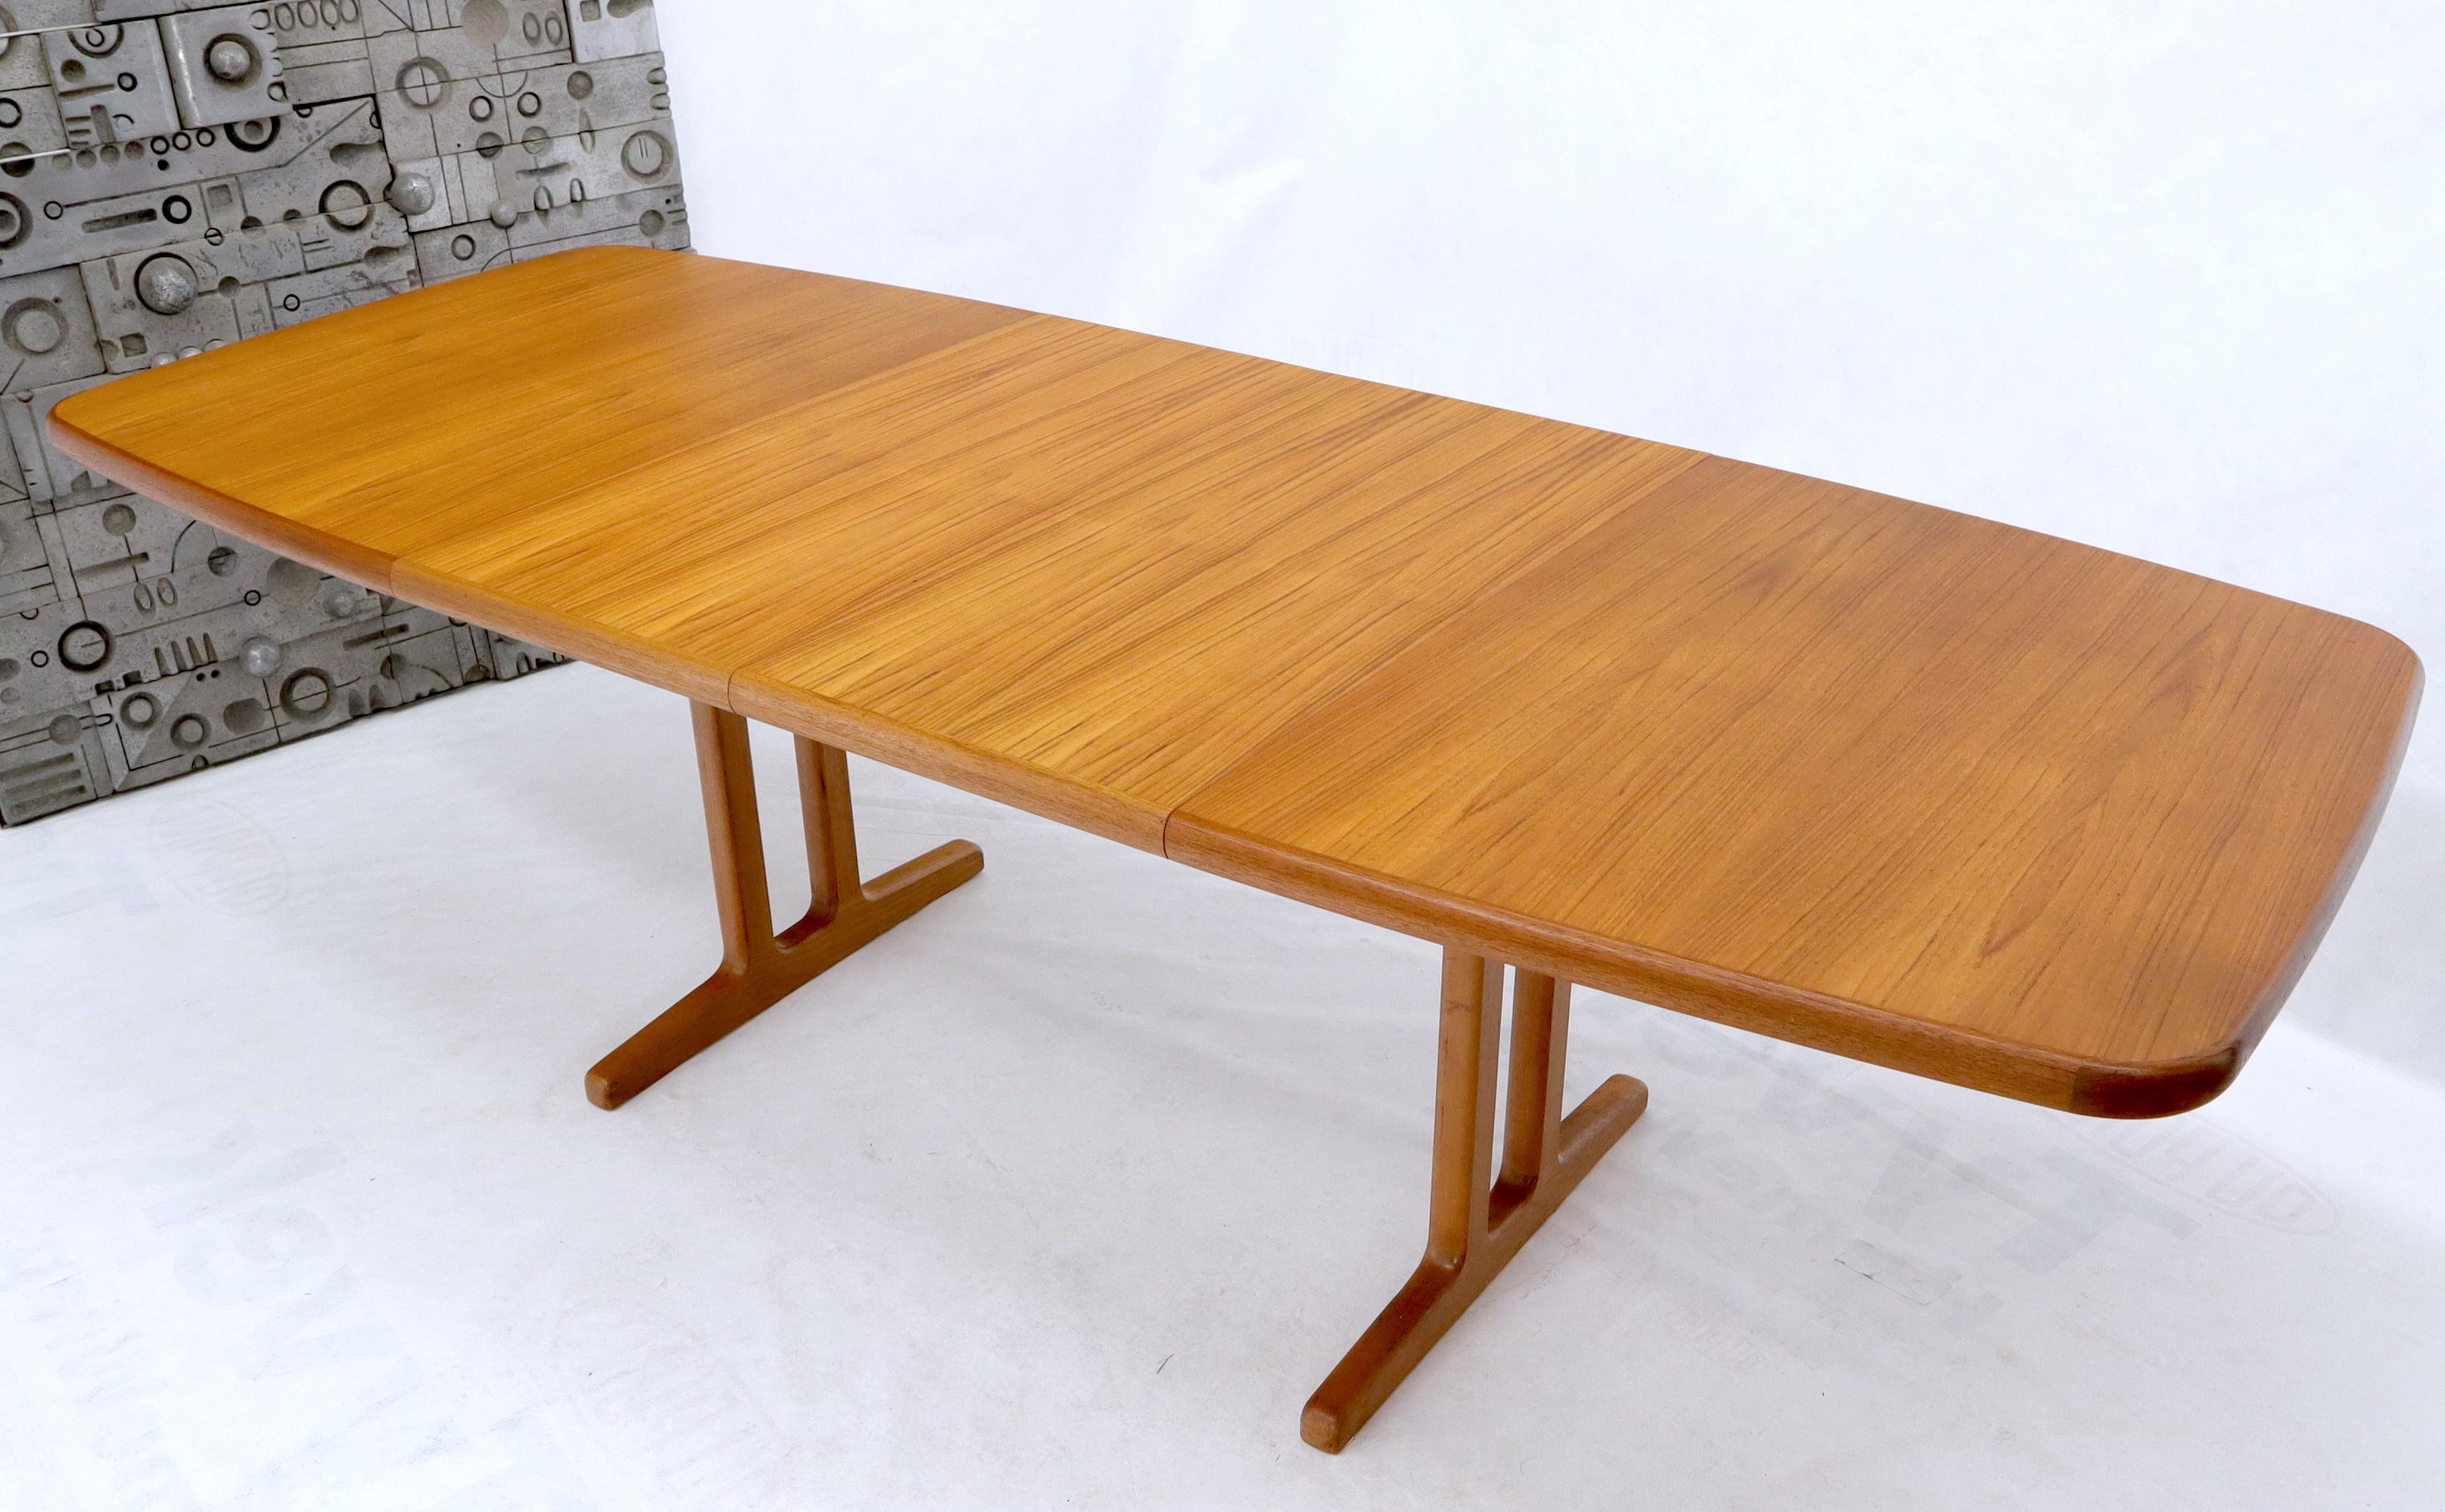 Super clean midcentury Danish modern teak dining table with 2 x 18